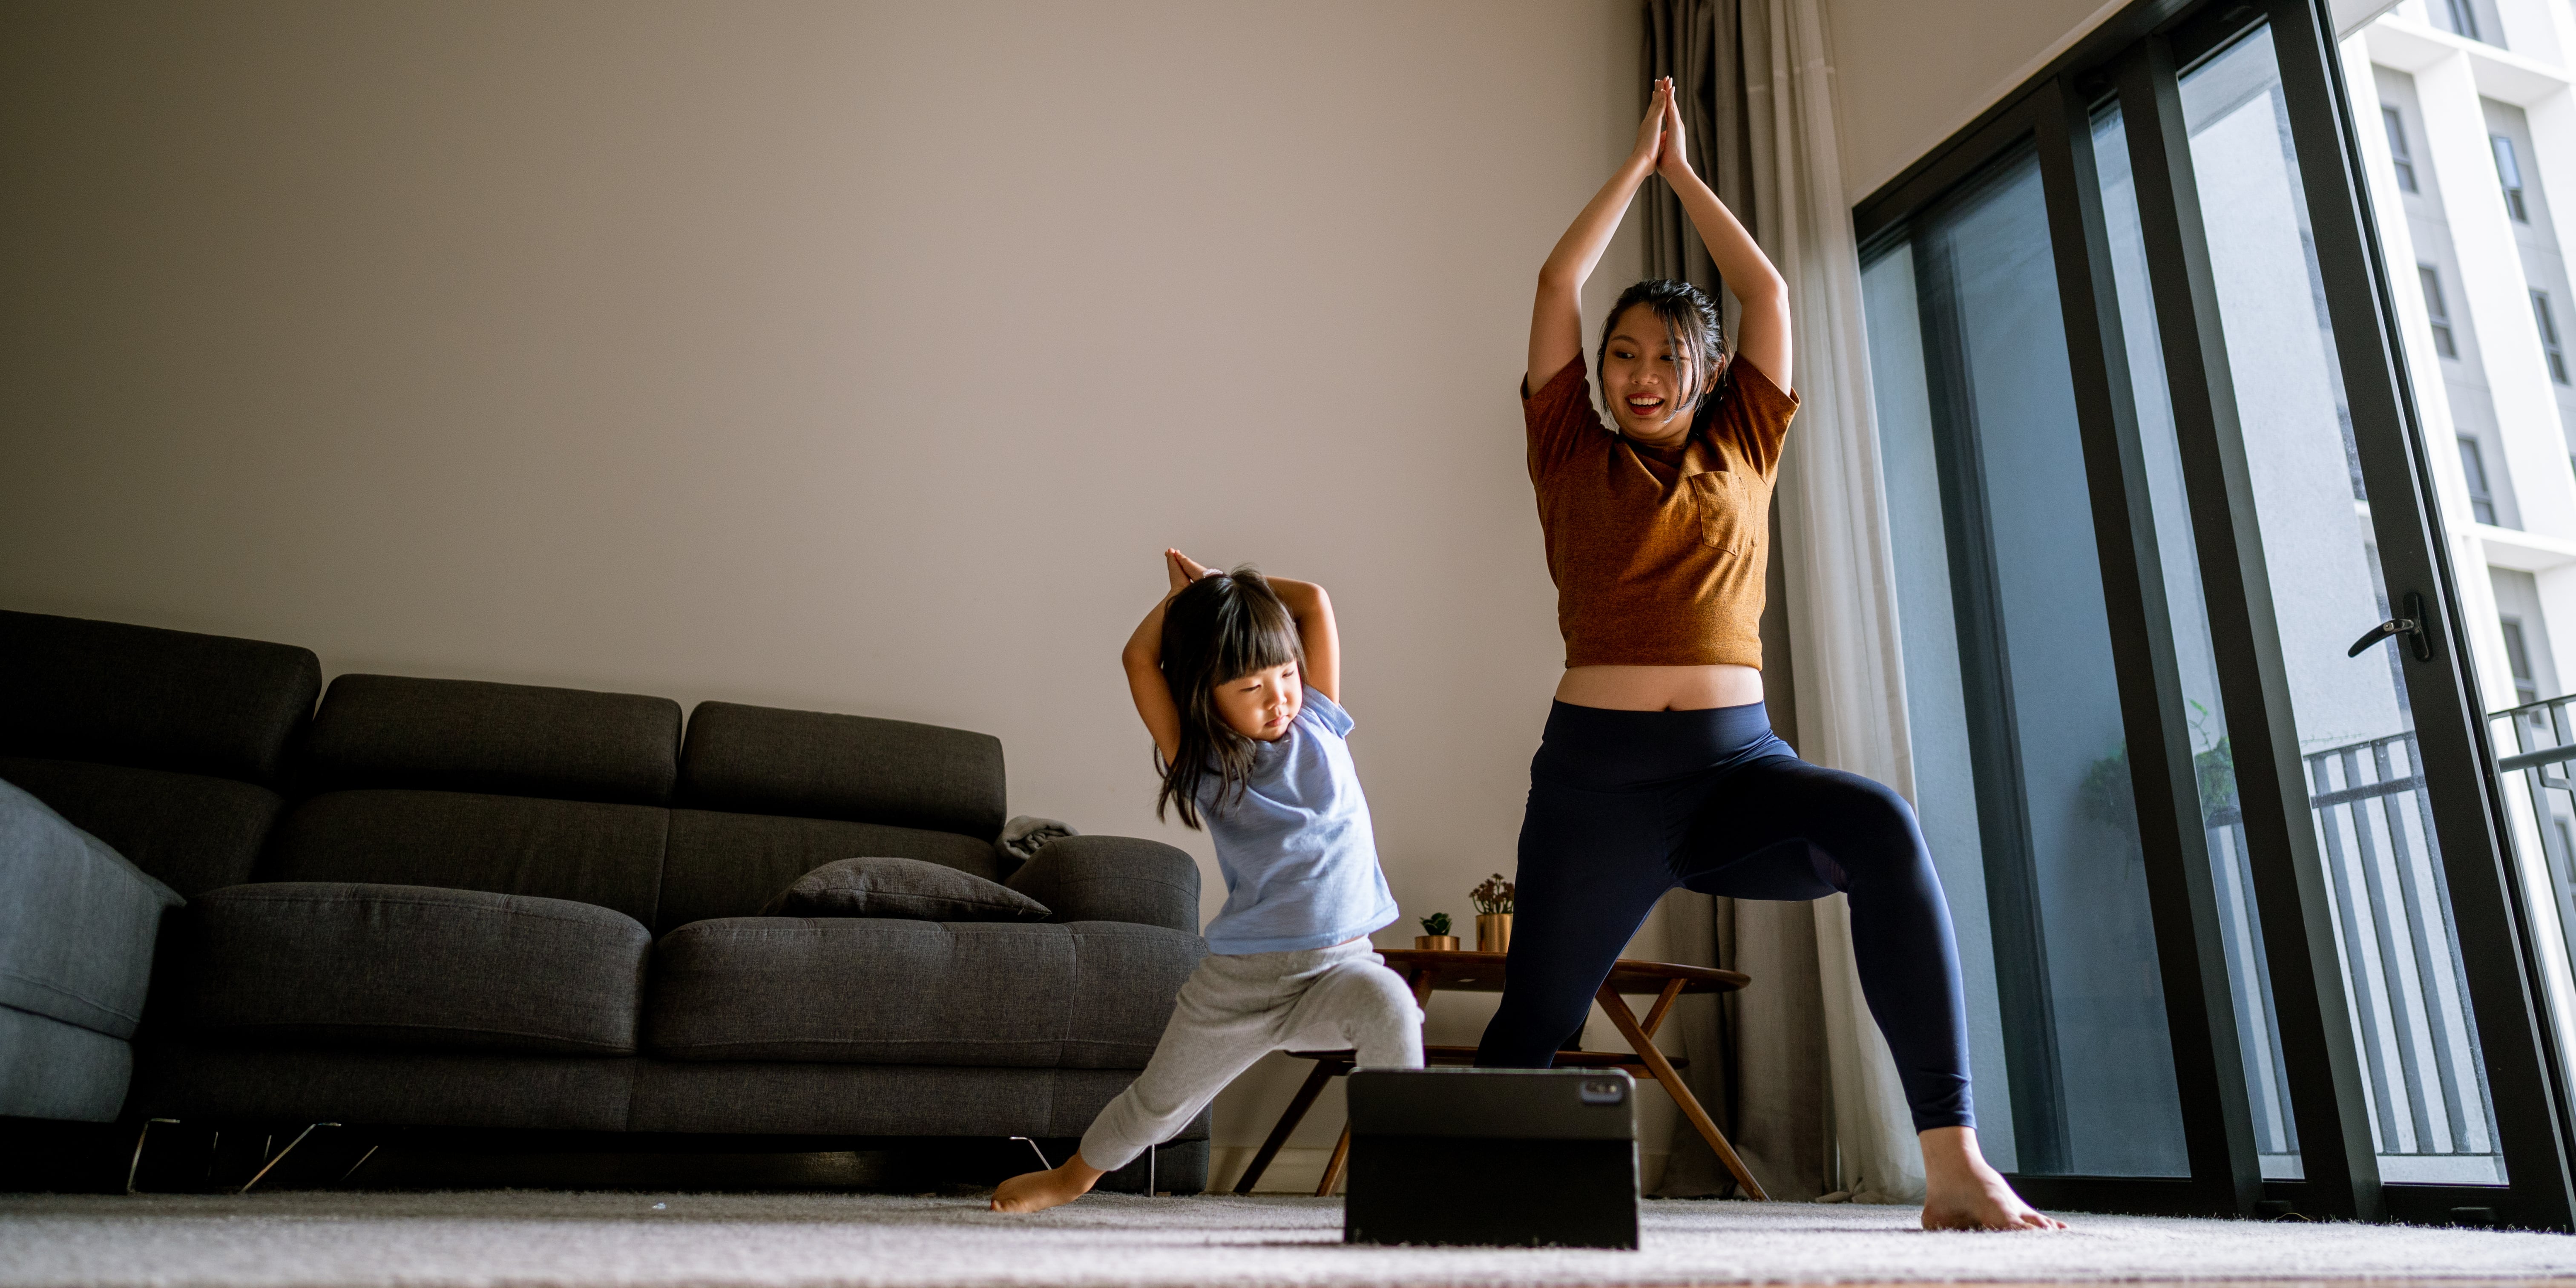 Frozen' yoga and more tips from Cosmic Kids' to get kids